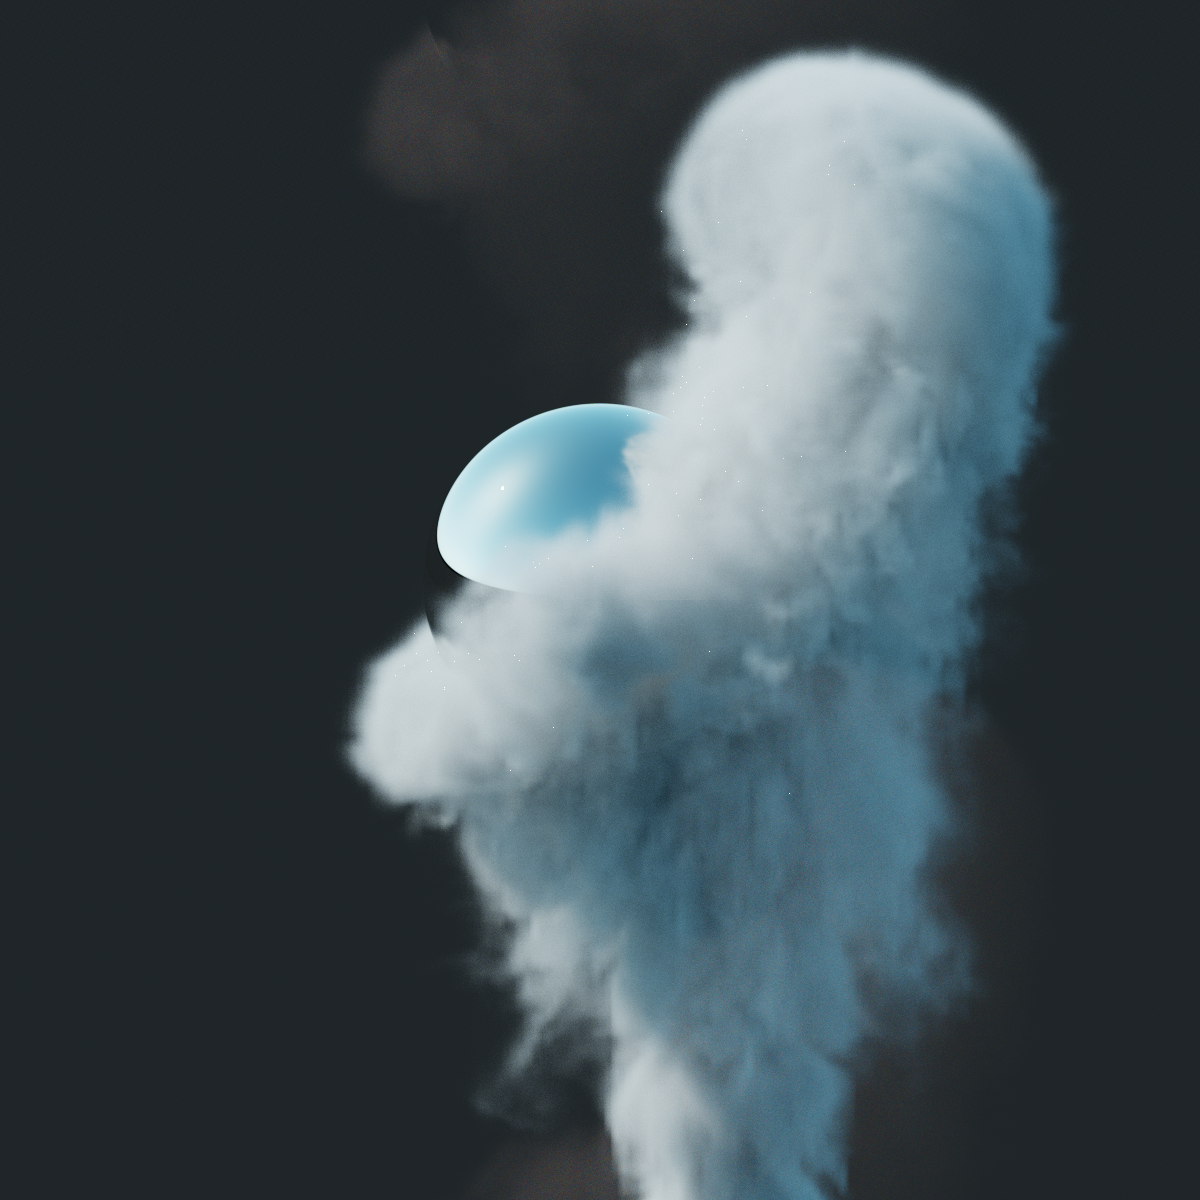 Smoke plume with sphere